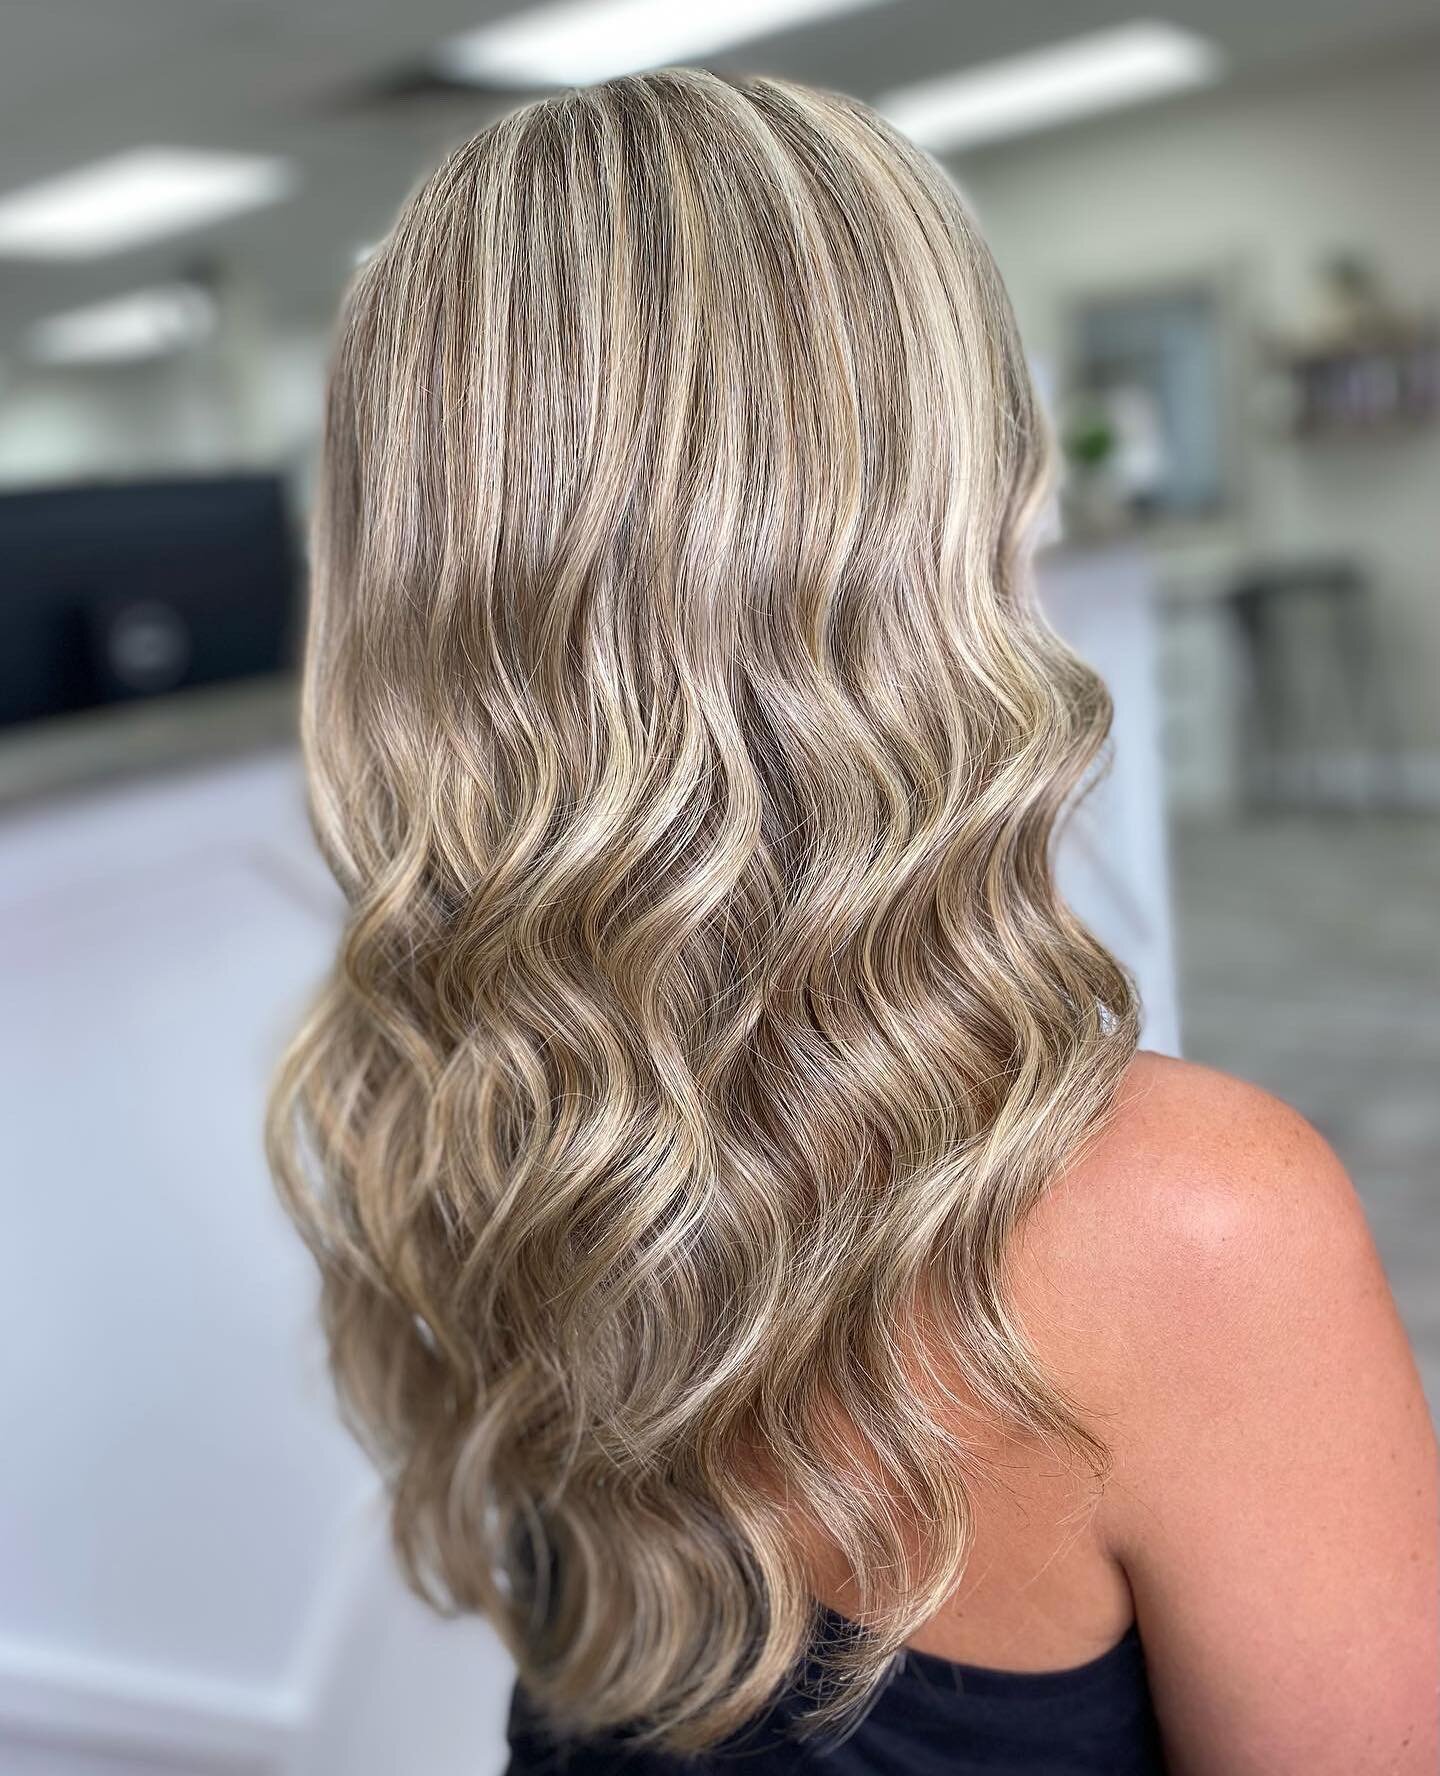 Fresh highlights &amp; lowlights by owner/stylist Shay✨

Today, Amanda asked to start prepping for her fall color with more lowlights🌿

#highlights #lowlights #kenra #amikahairproducts #saloncentric #cosmoprof #beachwaves #lehighvalleyhair #hairitag